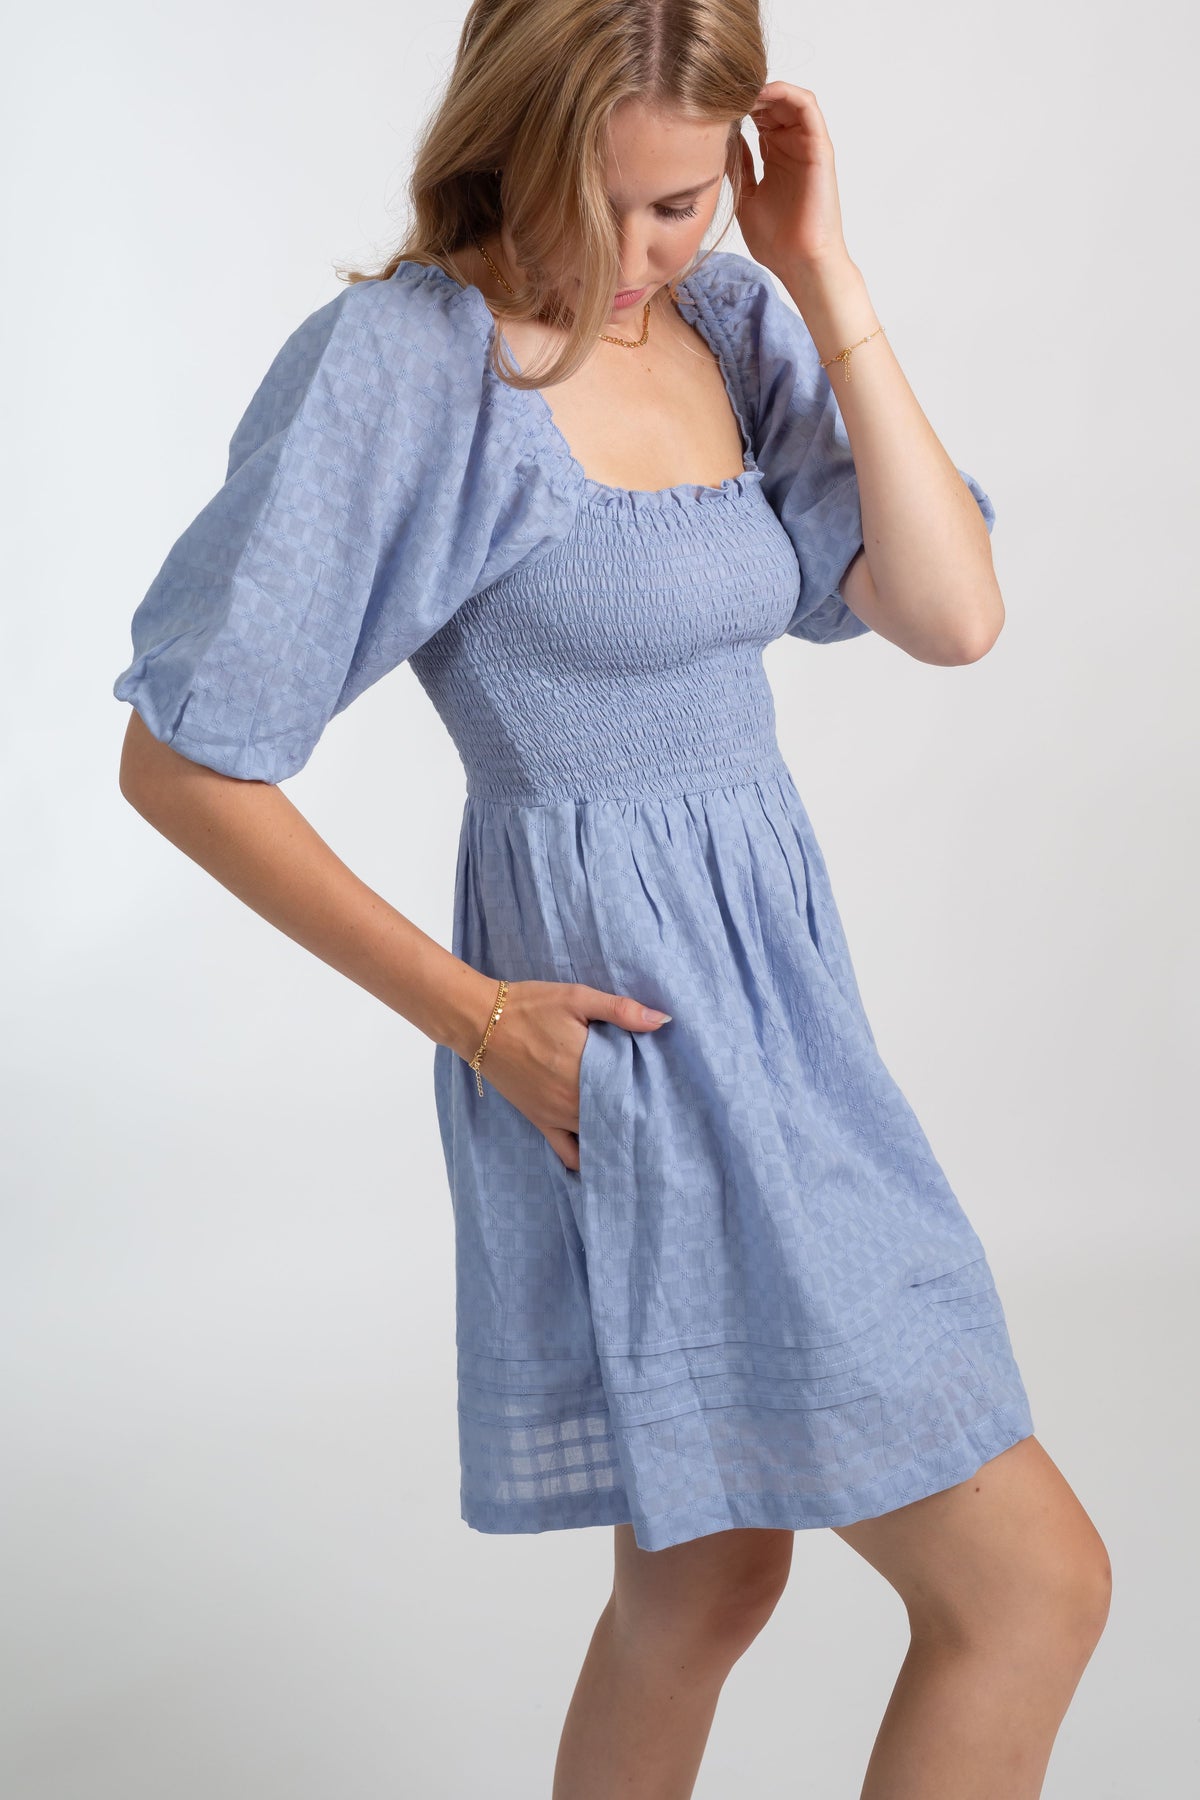 a zoomed in photo of a blonde hair female model wearing a sky blue color short sleeve light weight mini dress with one hand in her pocket of the dress